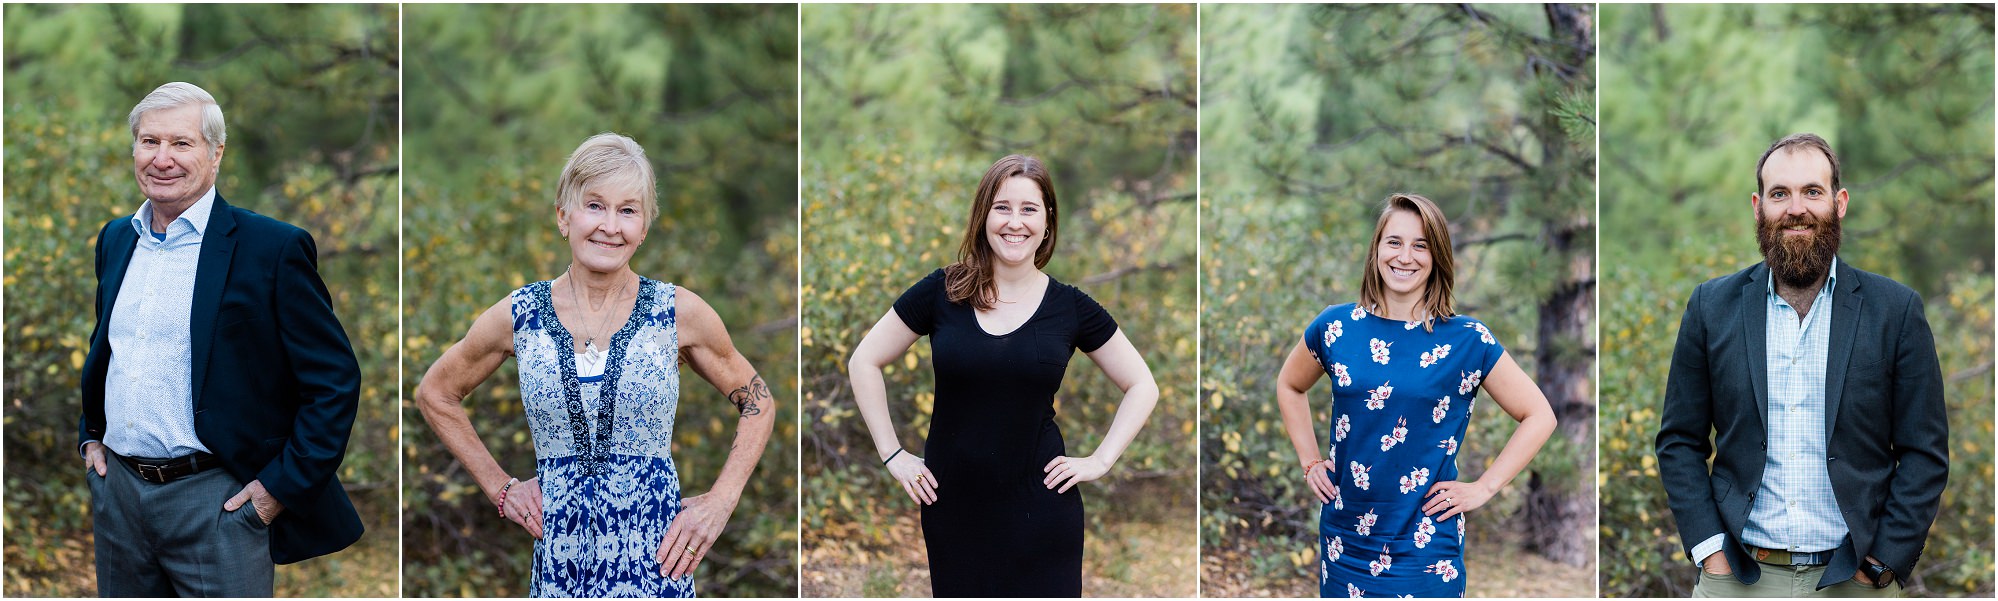 Wedding guest headshot session in Bend, Oregon. | Erica Swantek Photography